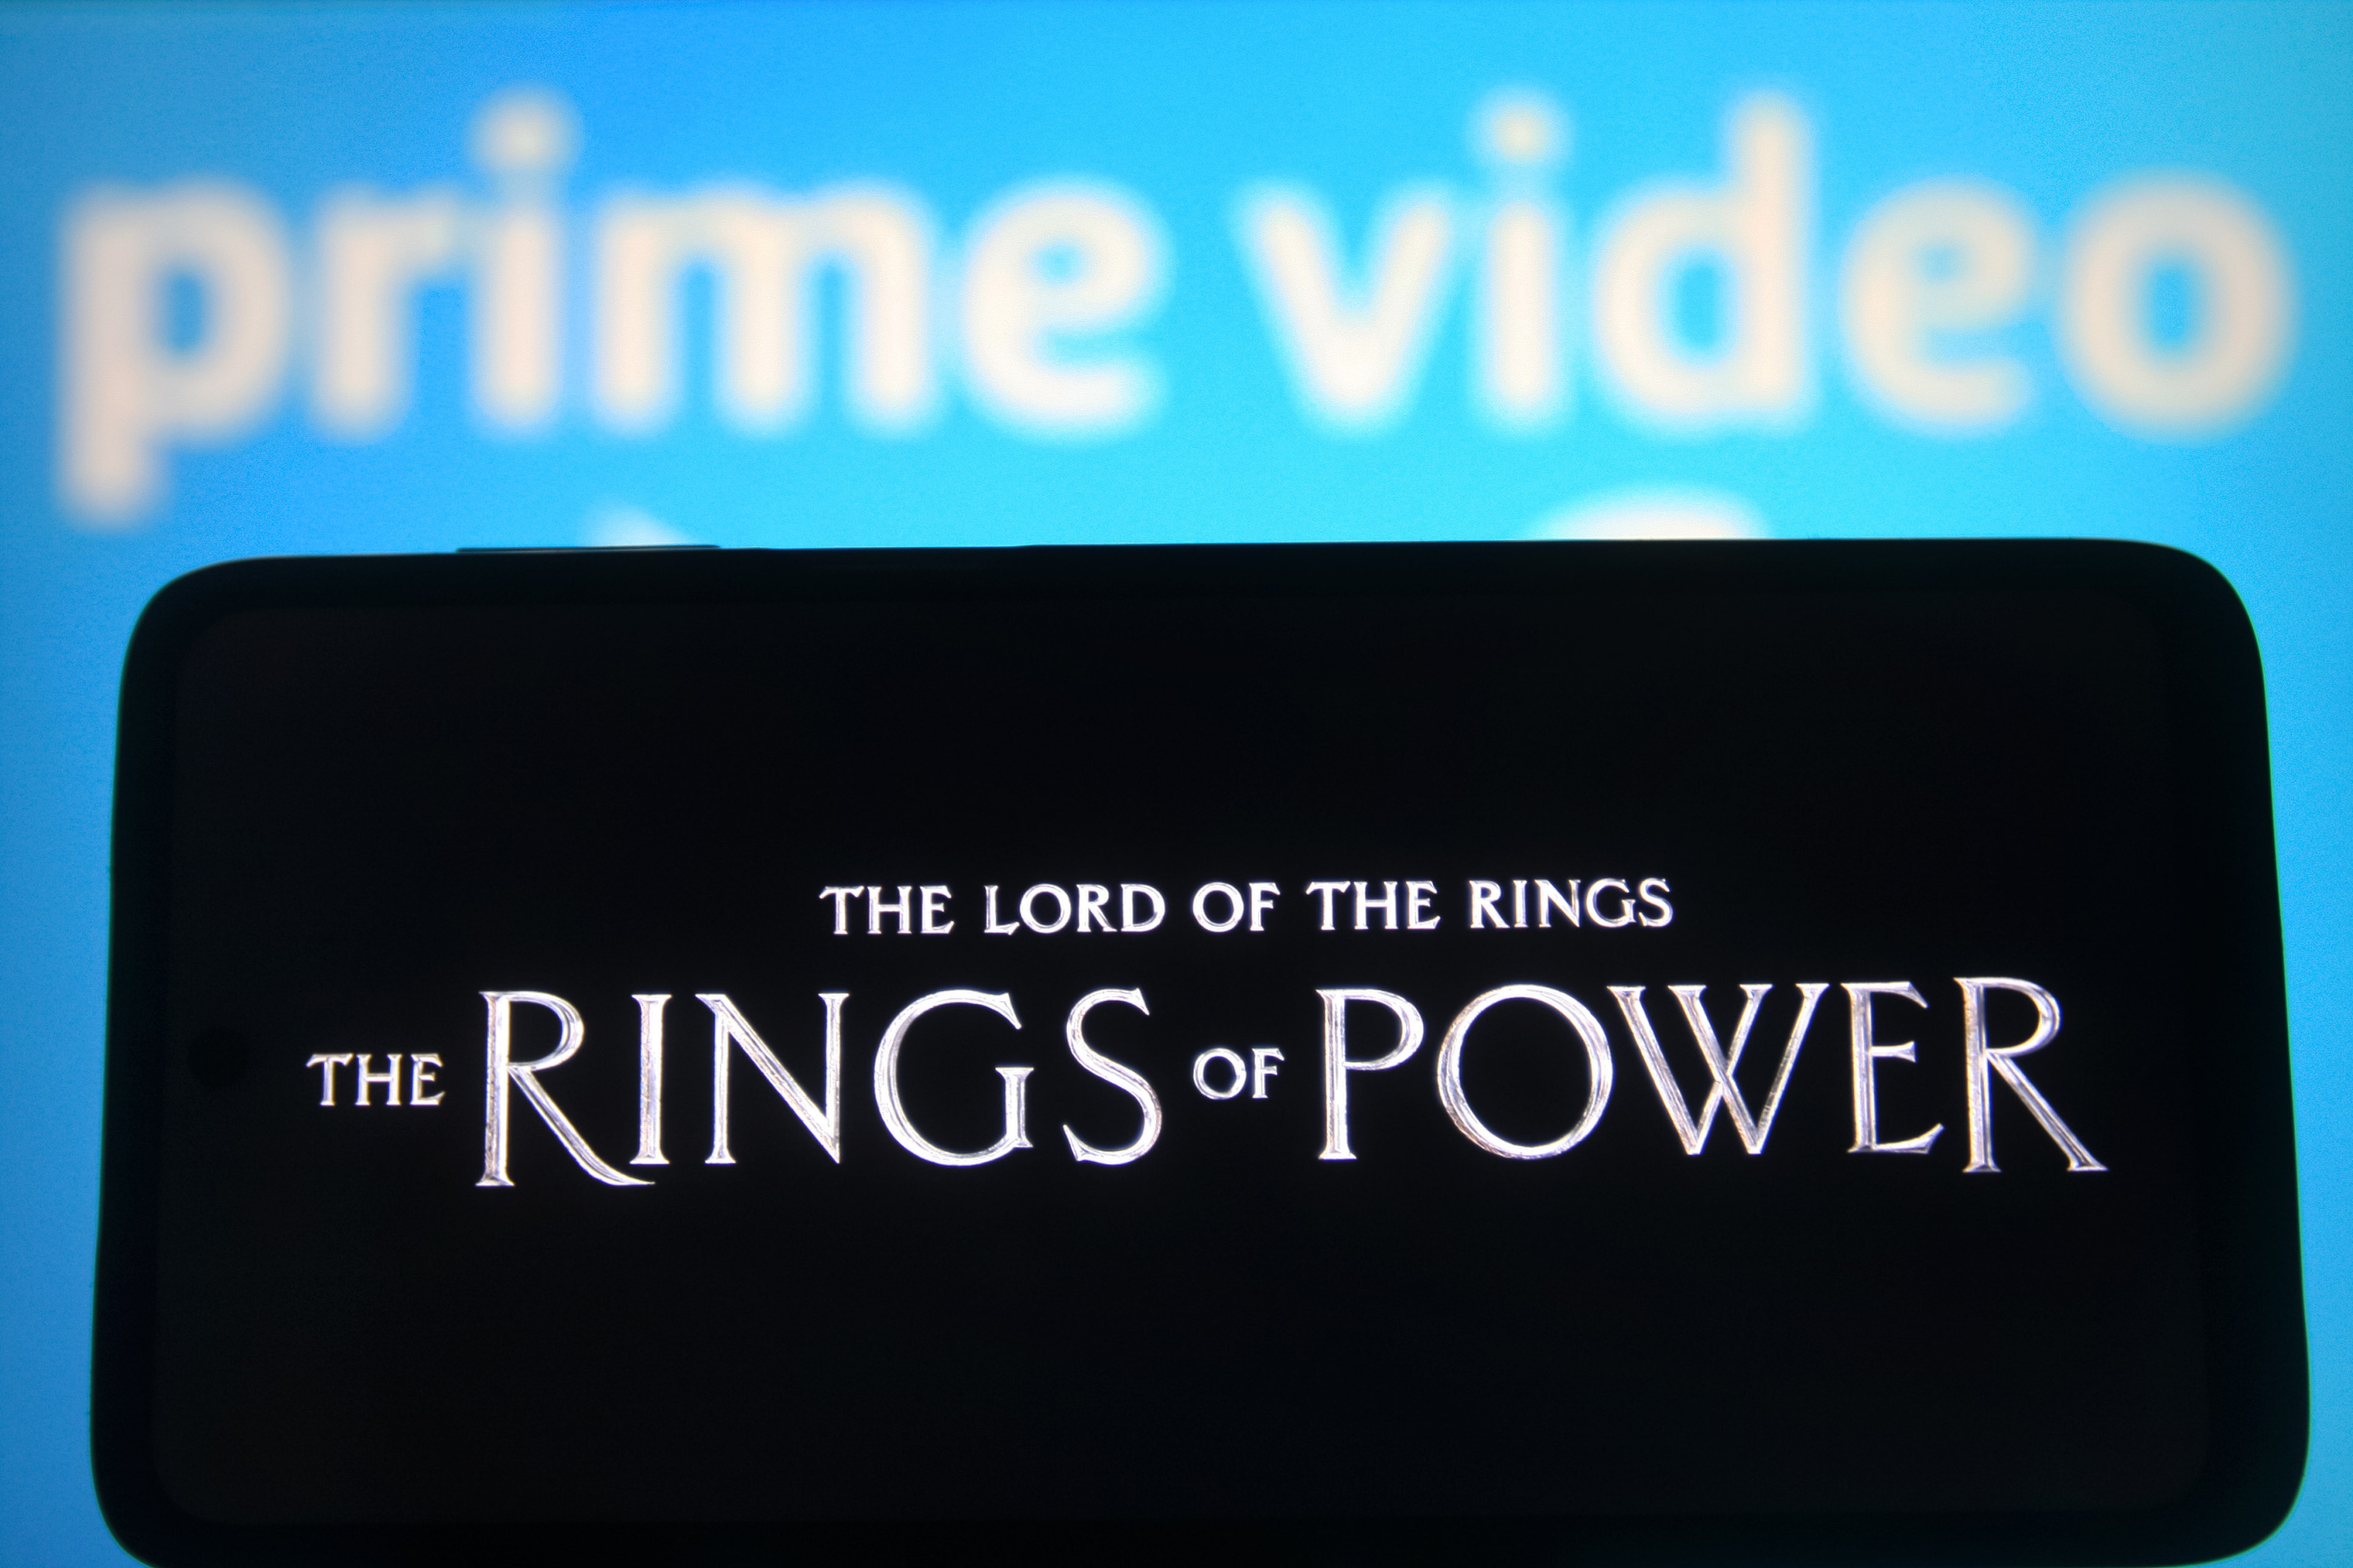 Bear McCreary - The Lord of the Rings: The Rings of Power (Season